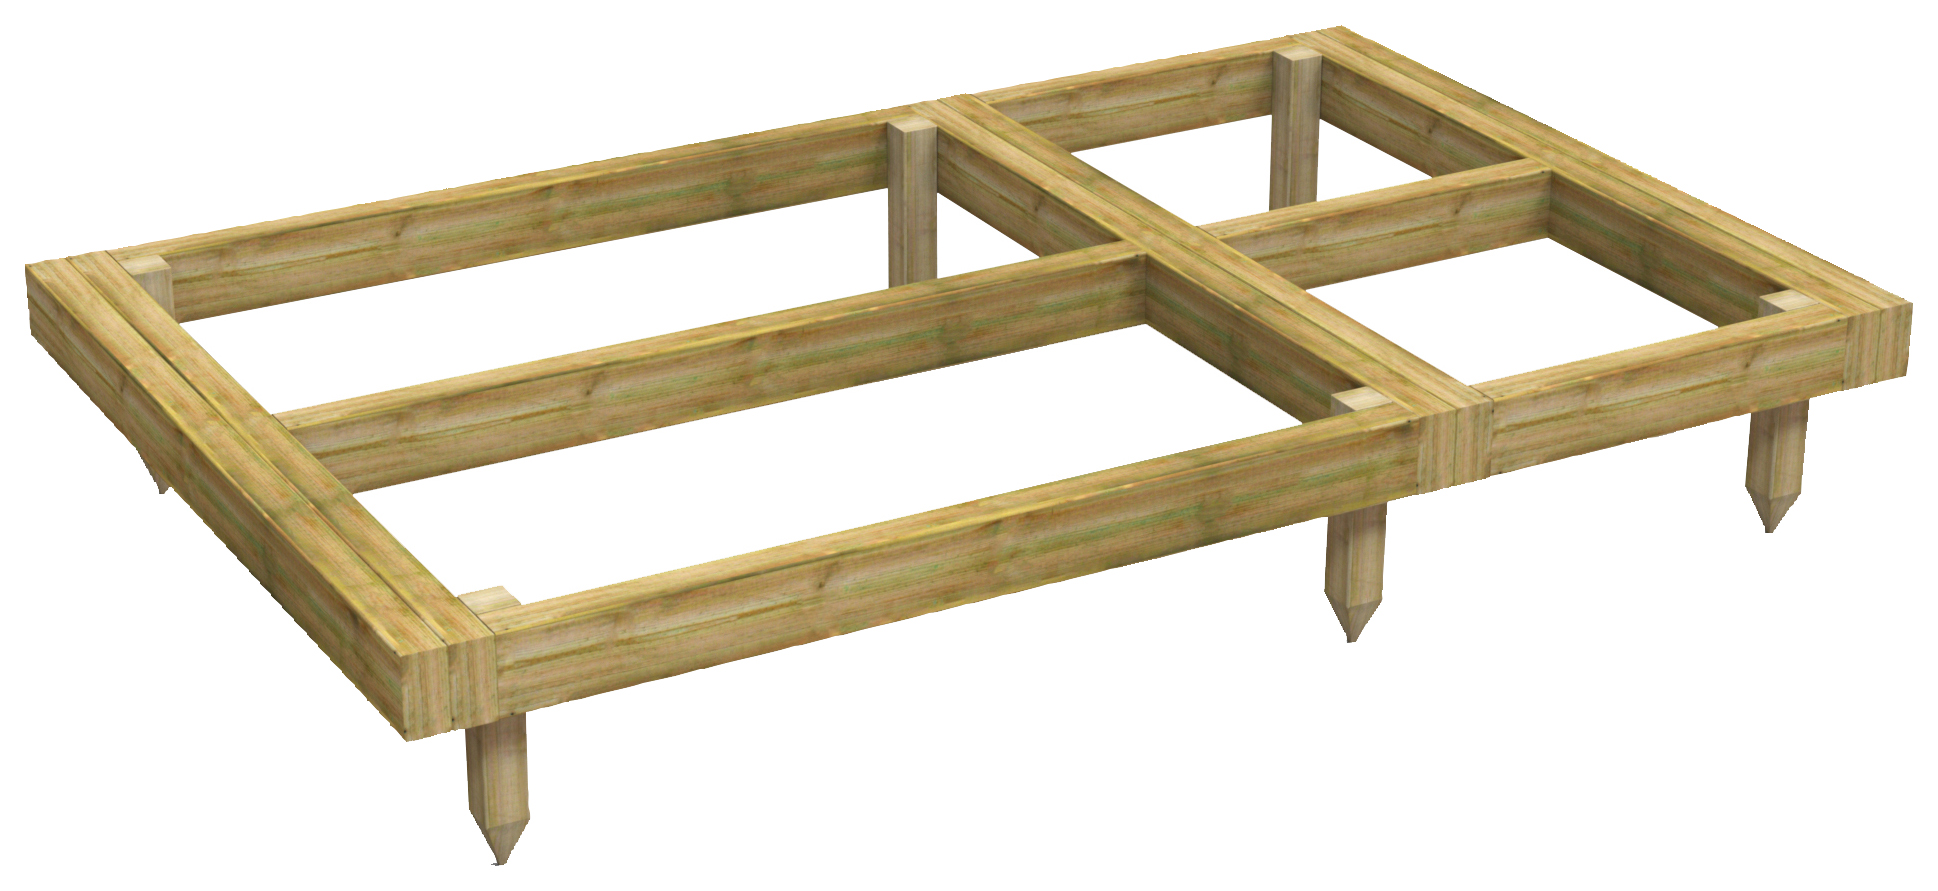 Power Sheds Pressure Treated Garden Building Base Kit - 6 x 4ft